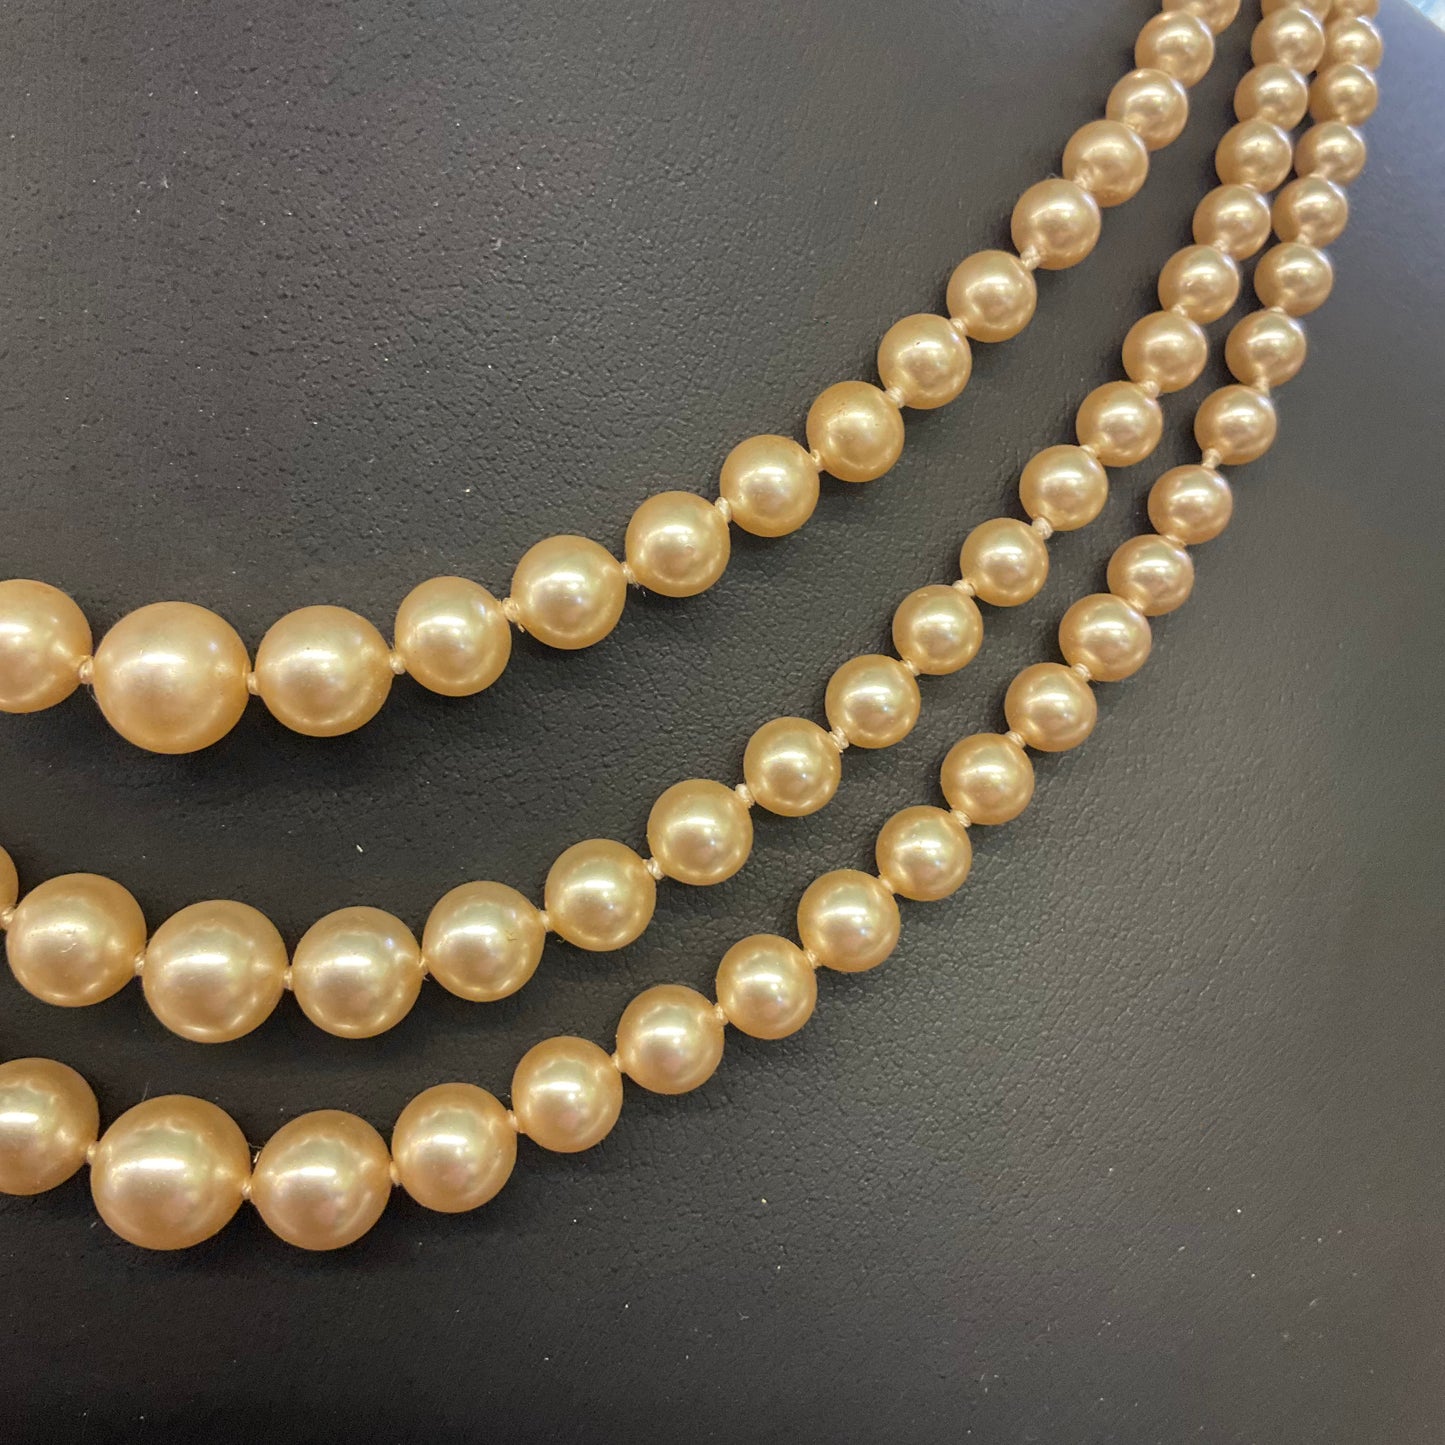 Vintage 1950/60s Triple strand faux pearl necklace by LOTUS, with silver (stamped) clasp, Rarely used in original box